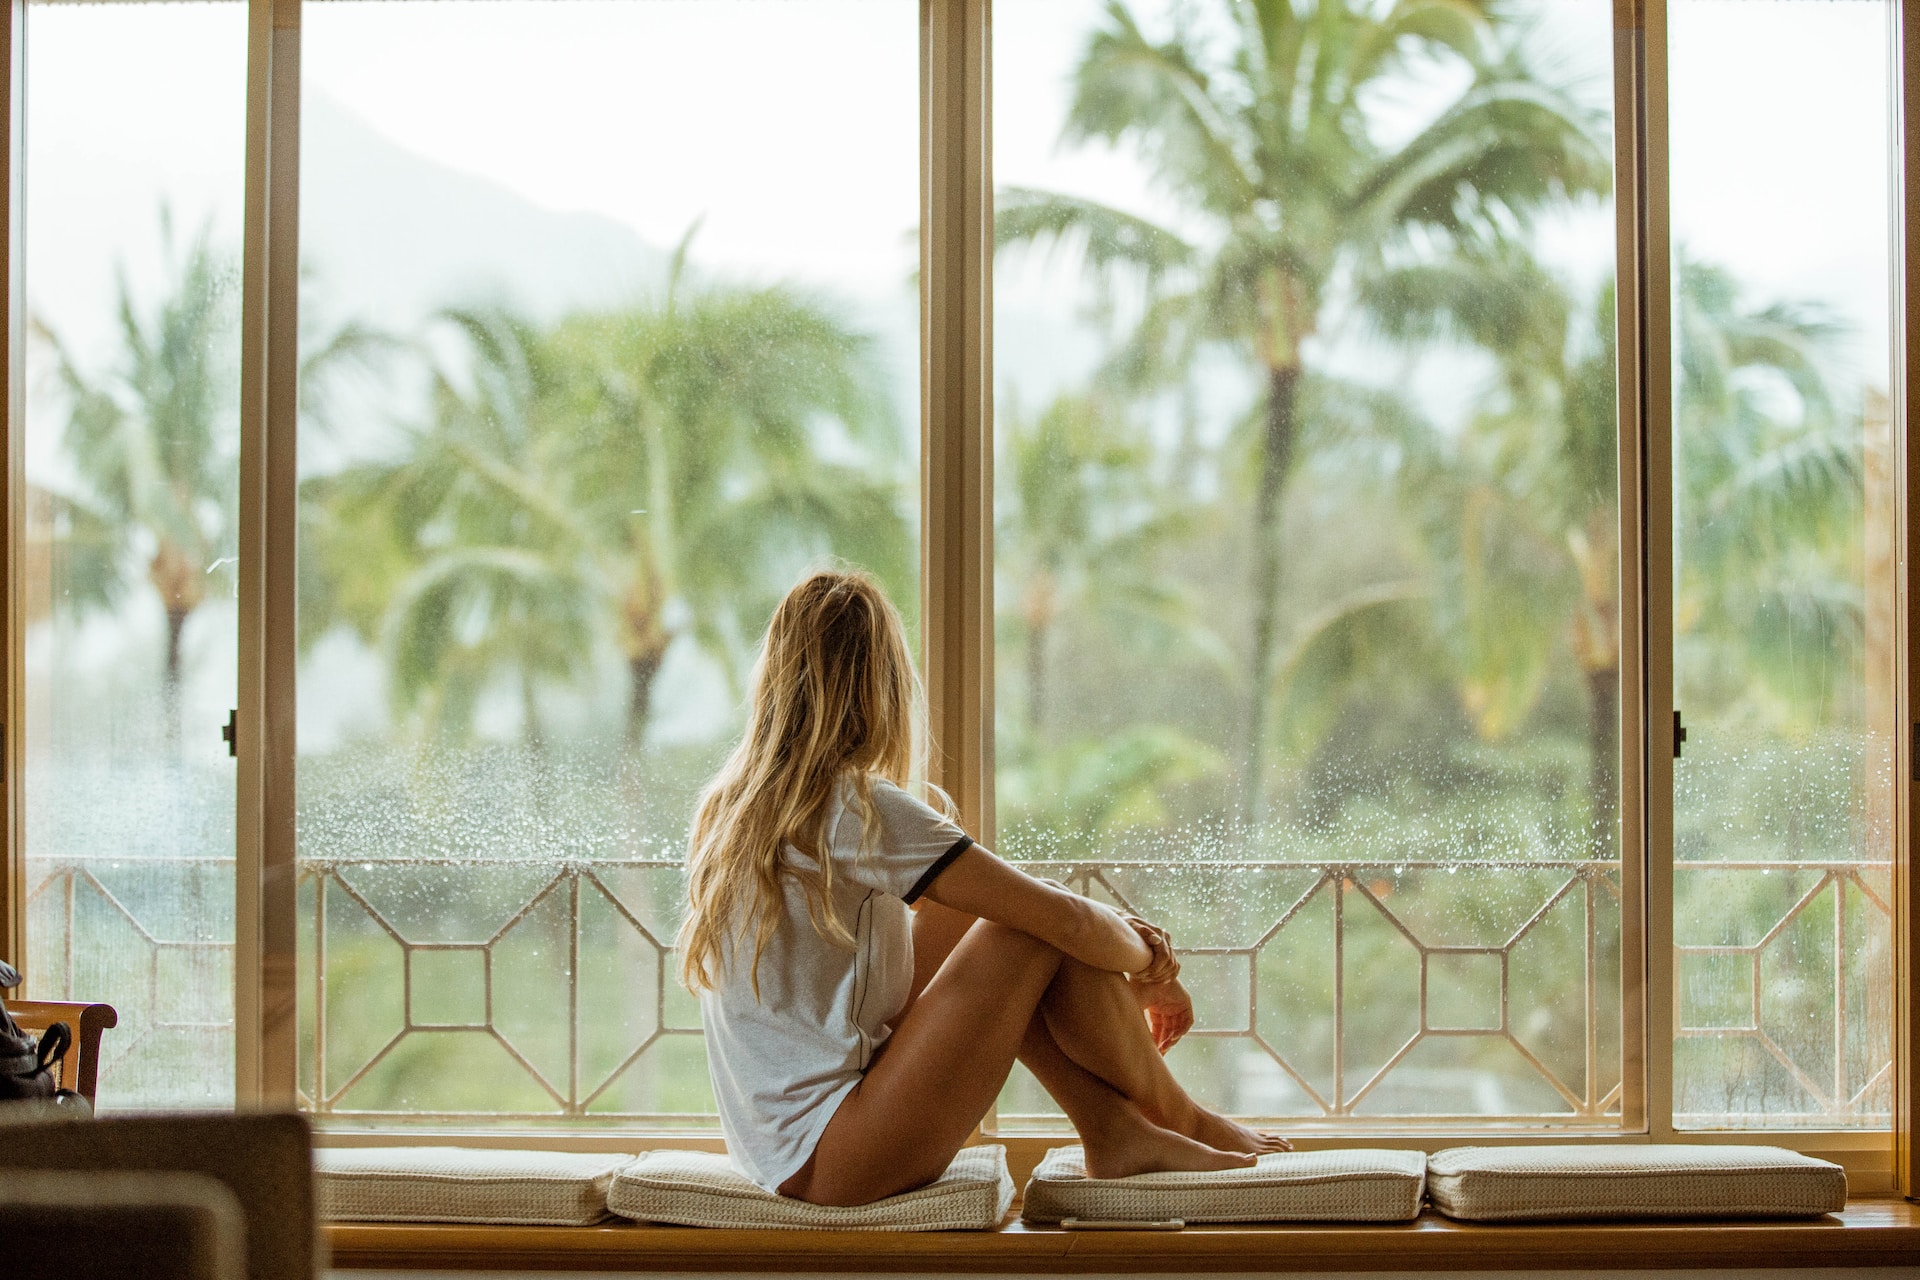 A woman sits in front of a window looking at palm trees.